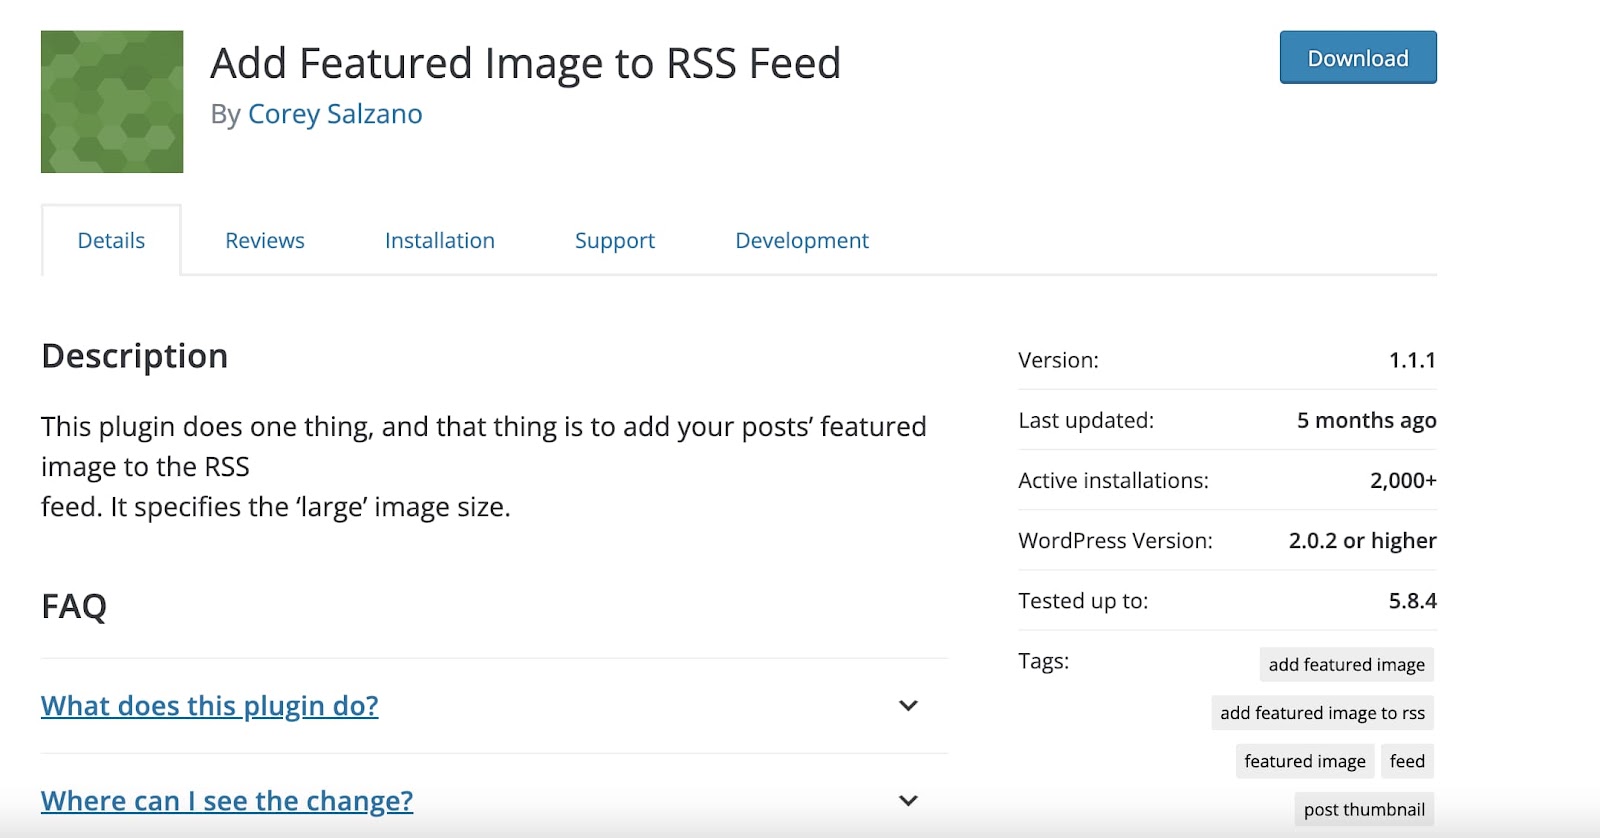 Add Featured Image to RSS Feed